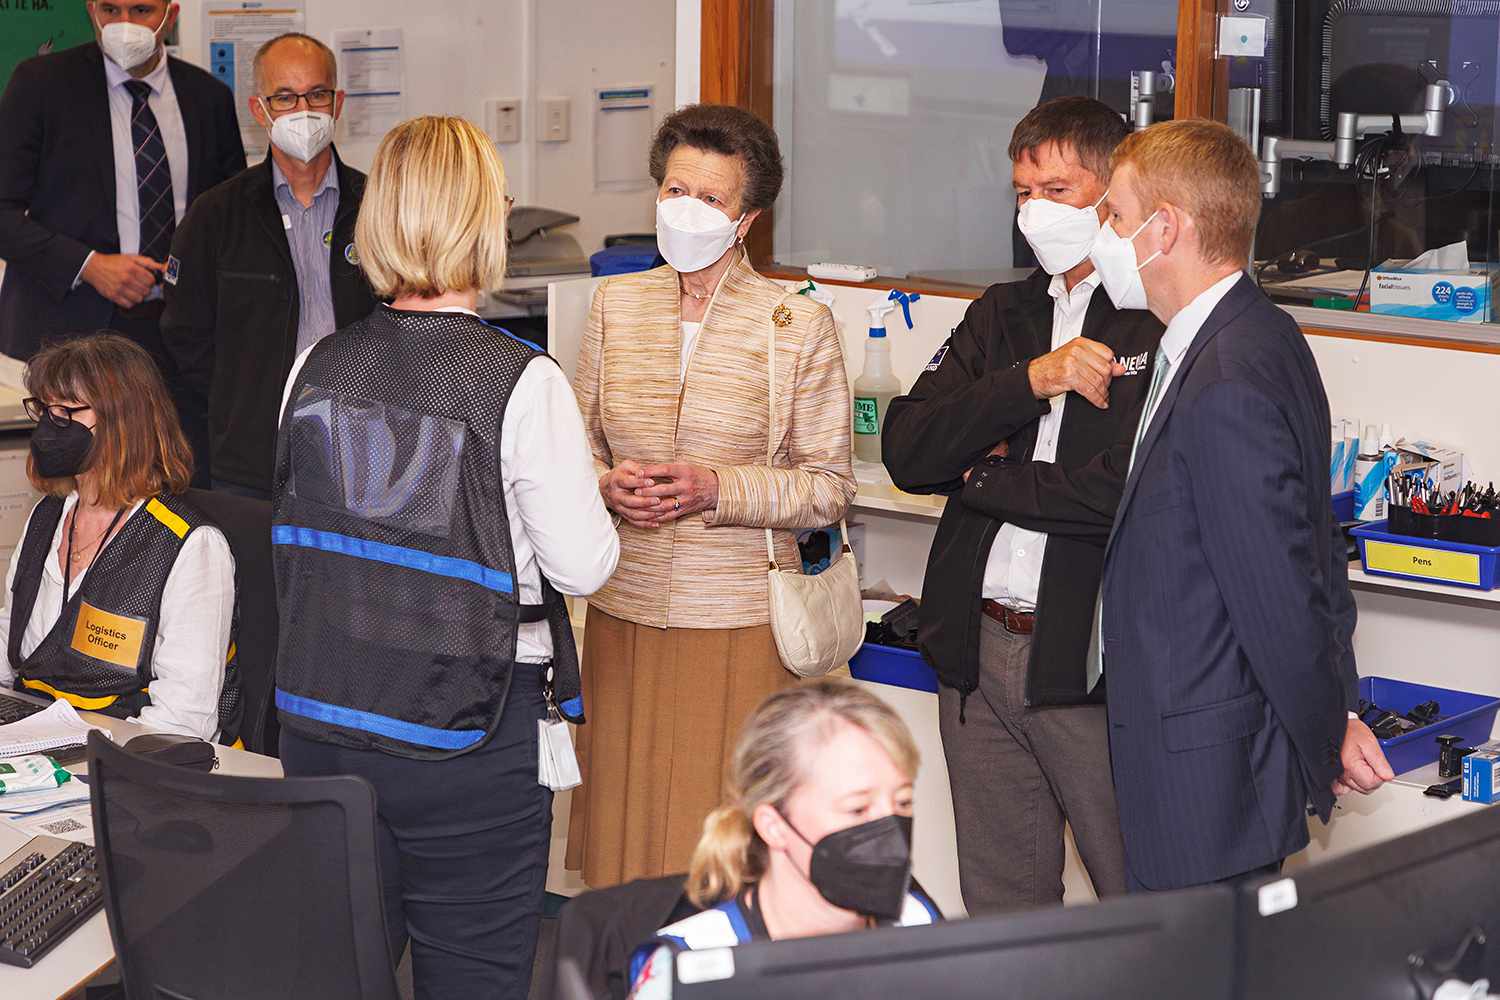 Princess Anne, Princess Royal visits the National Crisis Management Centre in the basement bunker of the Beehive as Cyclone Gabrielle causes chaos around the country, on February 15, 2023 in Wellington, New Zealand.